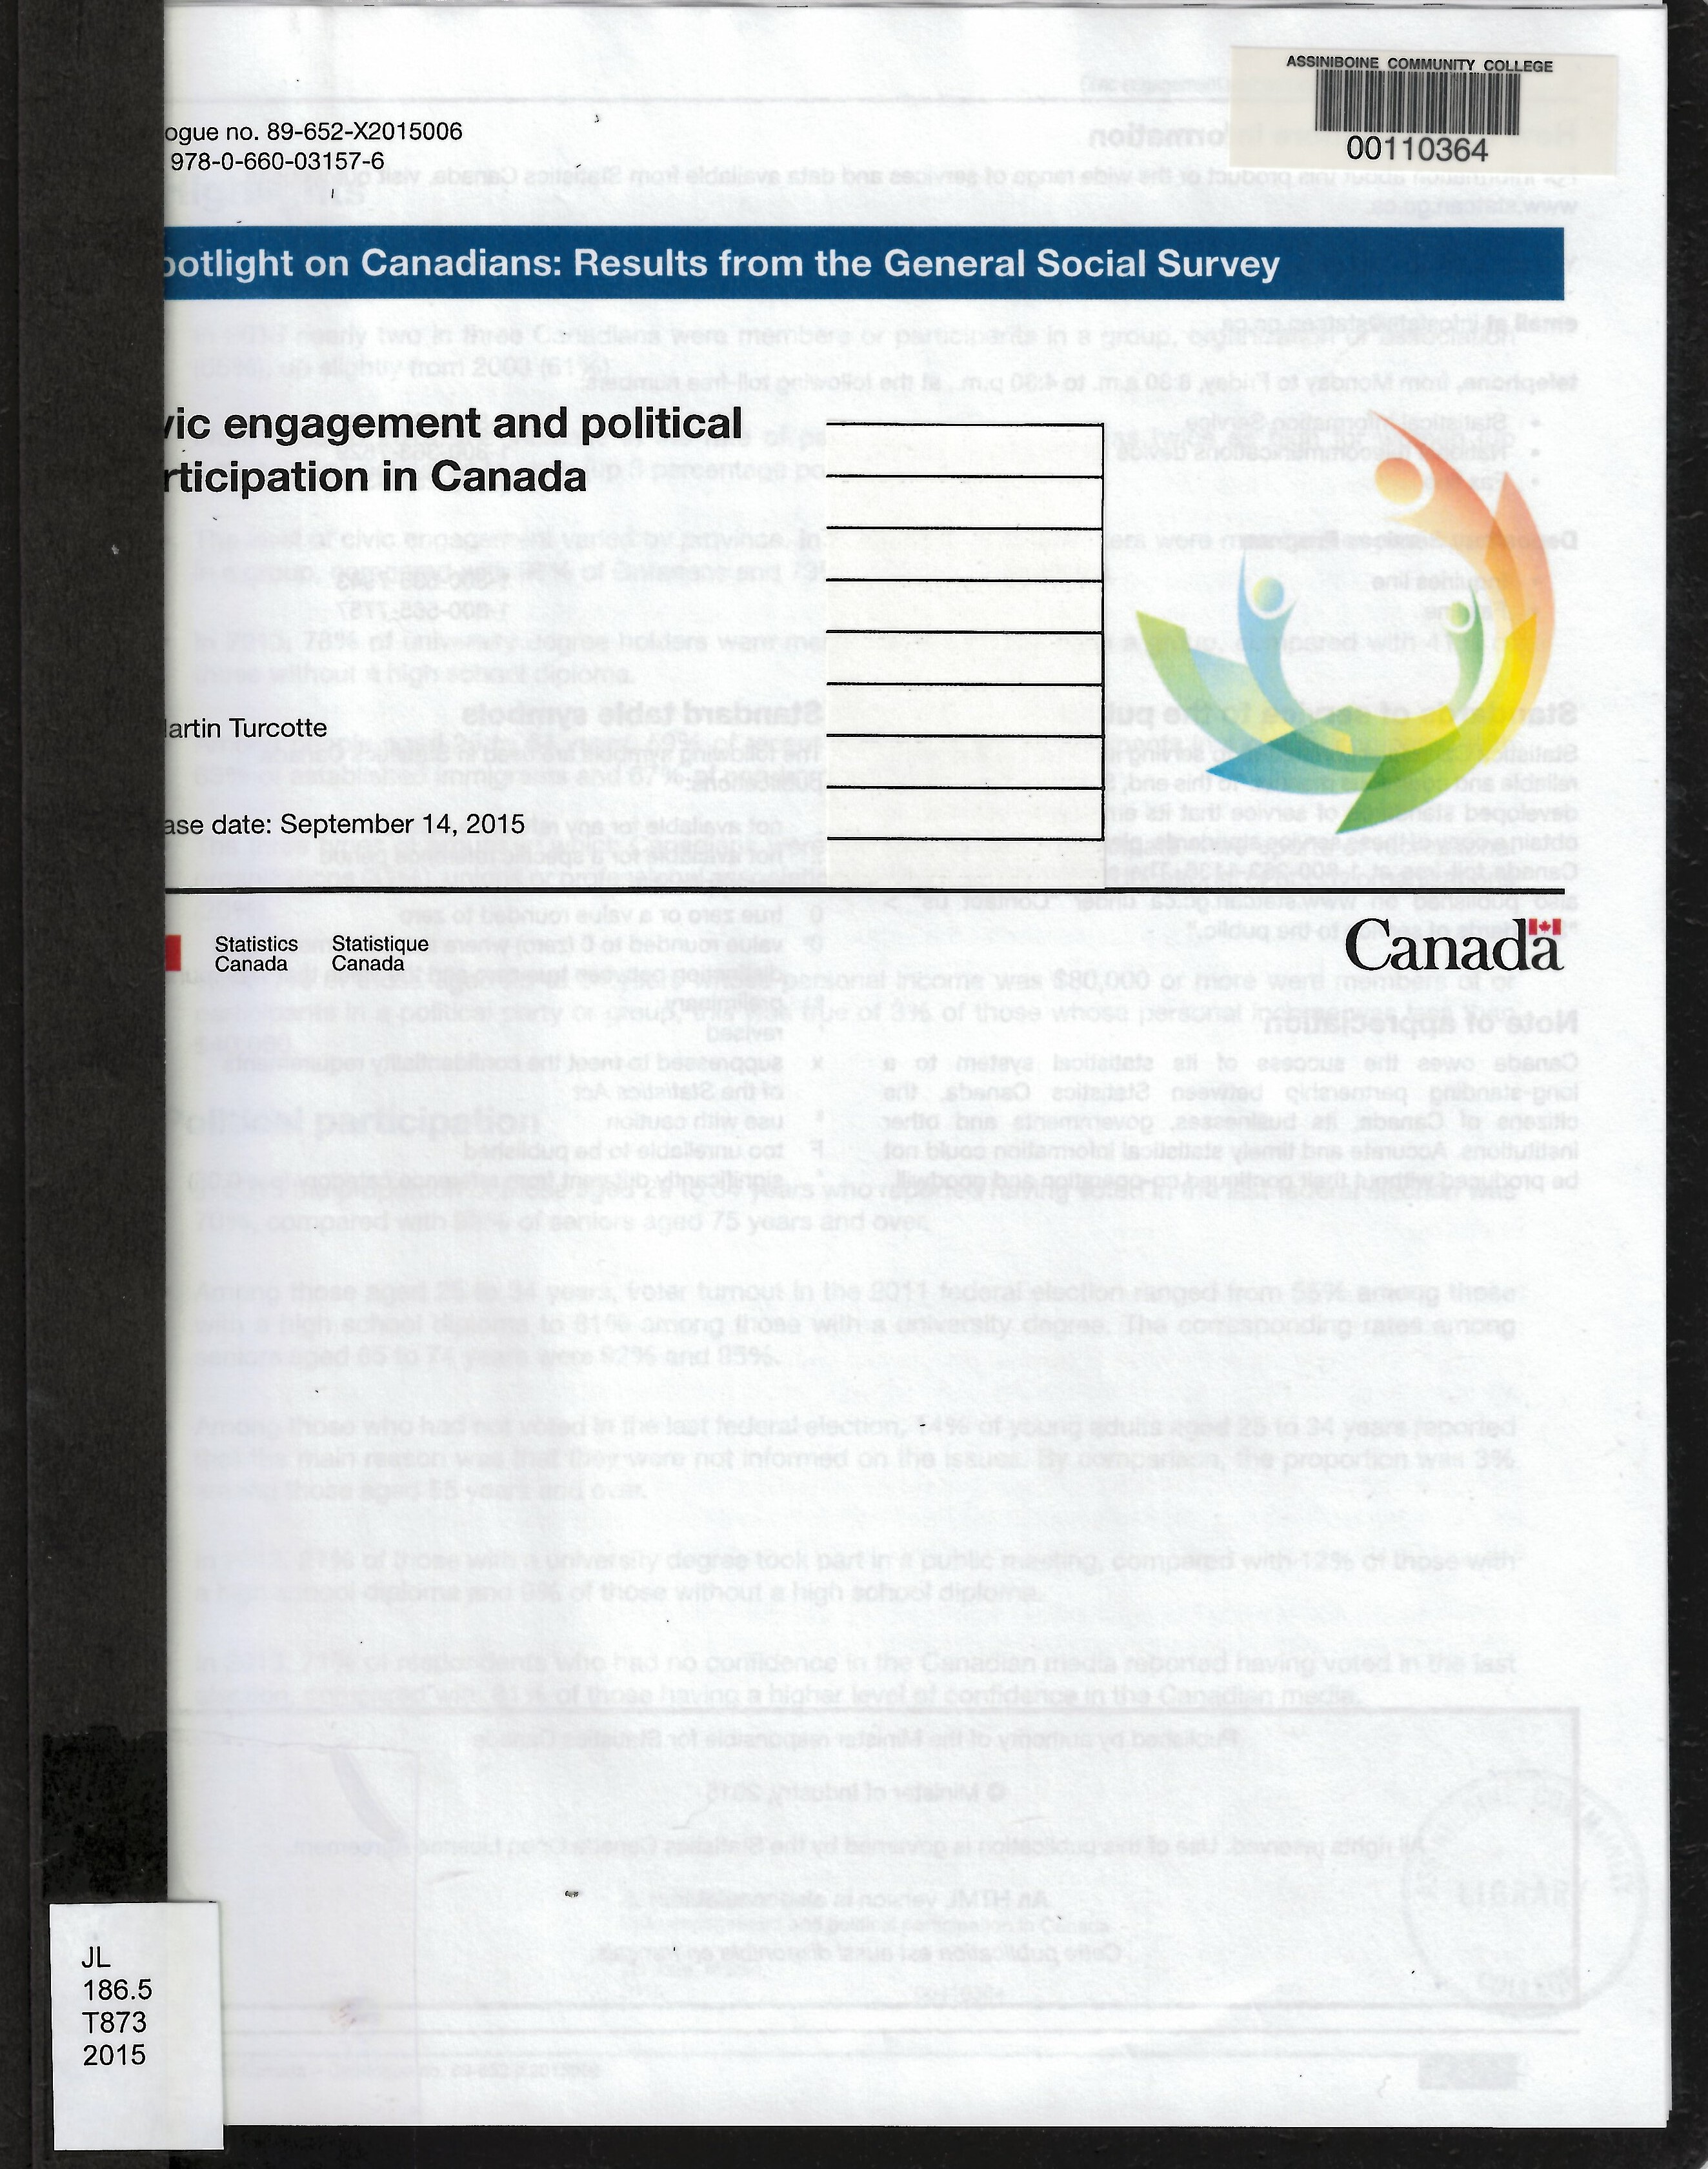 Civic engagement and political participation in Canada